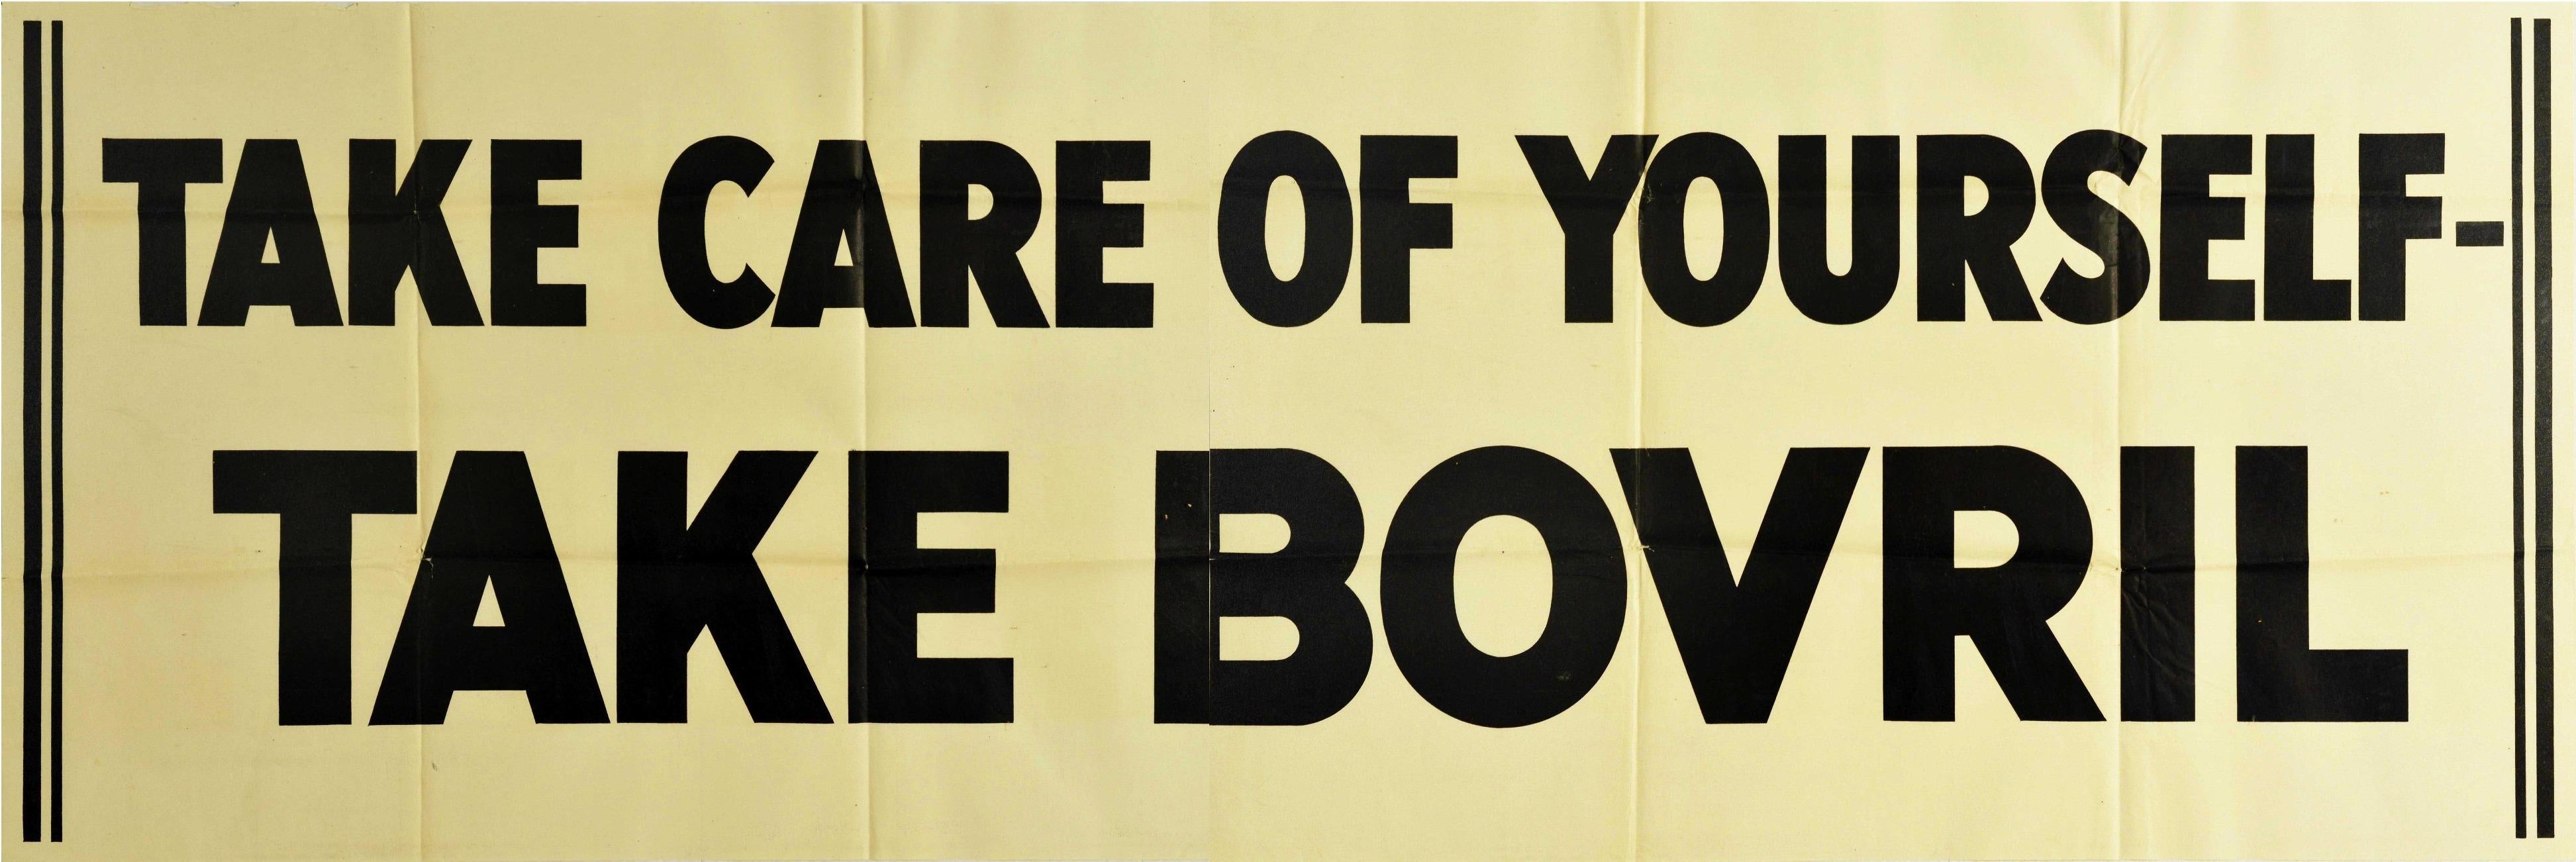 Original vintage food advertising poster for Bovril - Take care of yourself Take Bovril - featuring bold black lettering on a white background with black borders on the sides. Printed in Britain in the 1930s, this campaign used puns and word play to